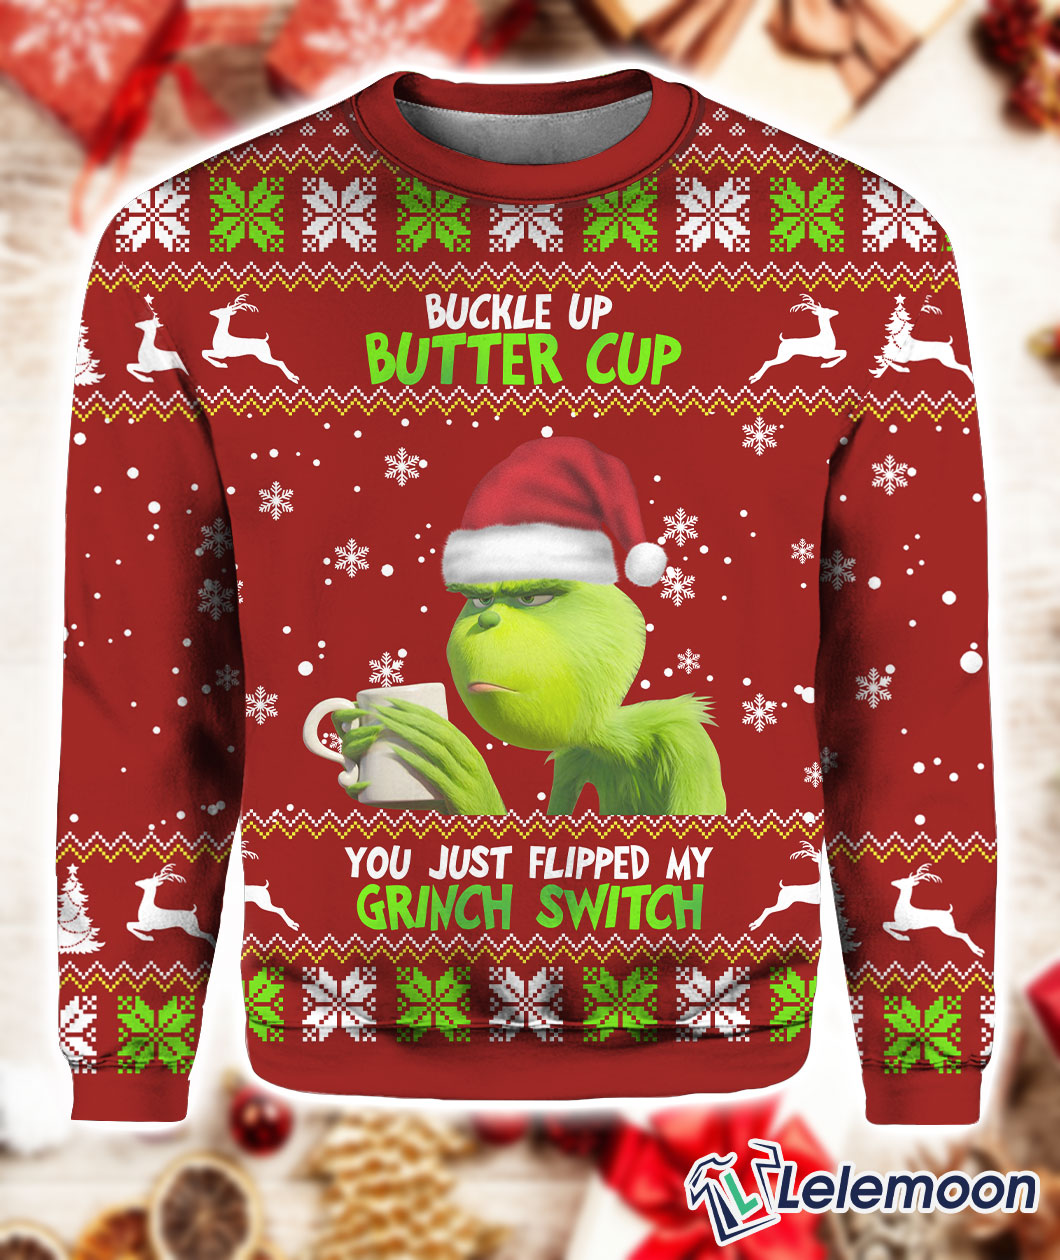 https://www.lelemoon.com/wp-content/uploads/2023/12/Buckle-Up-Buttercup-You-Just-Flipped-My-Grnch-Switch-Ugly-Christmas-Sweater-3.jpg